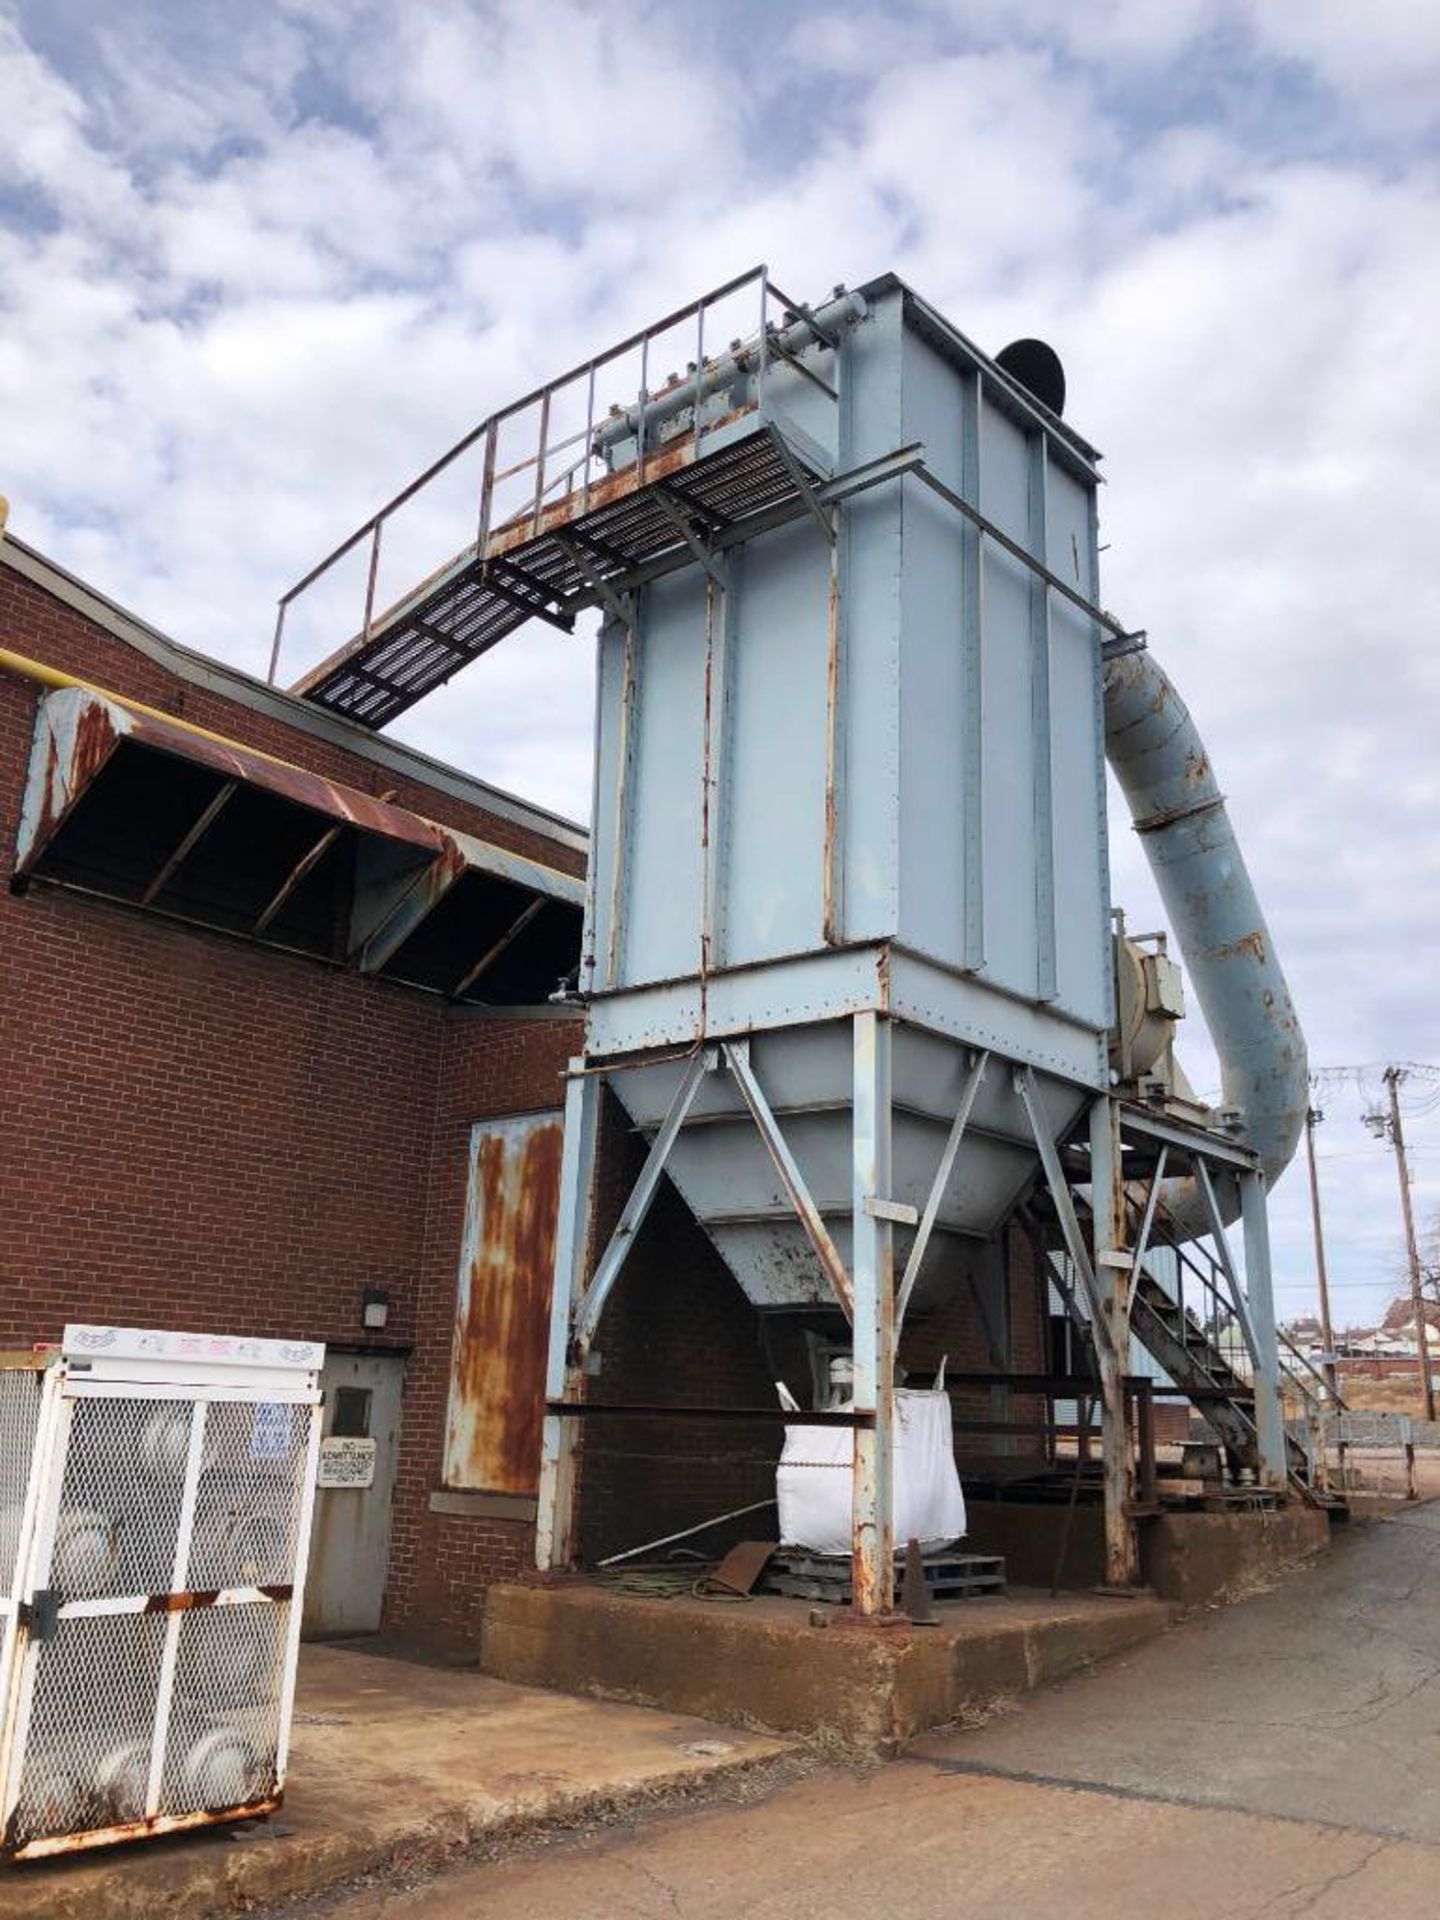 LOT: Grind Booth Dust Collector Pulse Bag with 60 hp Greenneck Blower Model 33-BISW-41-9r-111, 96 Ba